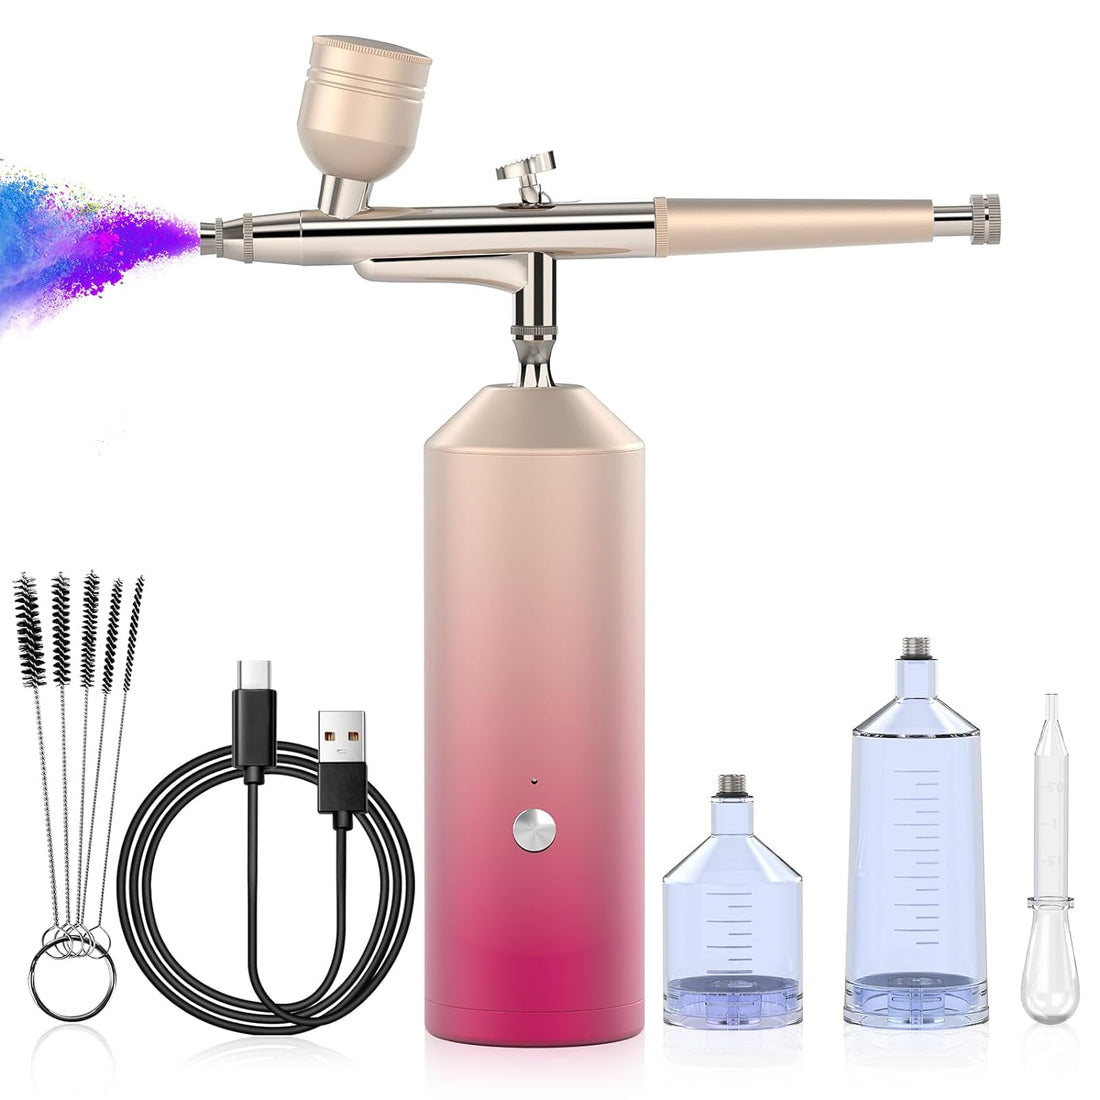 Airbrush Kit, Dual Action Airbrush for Nails, Rechargeable Cordless Airbrush Gun Kit with 0.35mm Tip, 30PSI High Pressure Airbrush for Cake Decorating, Painting, Art Drawing